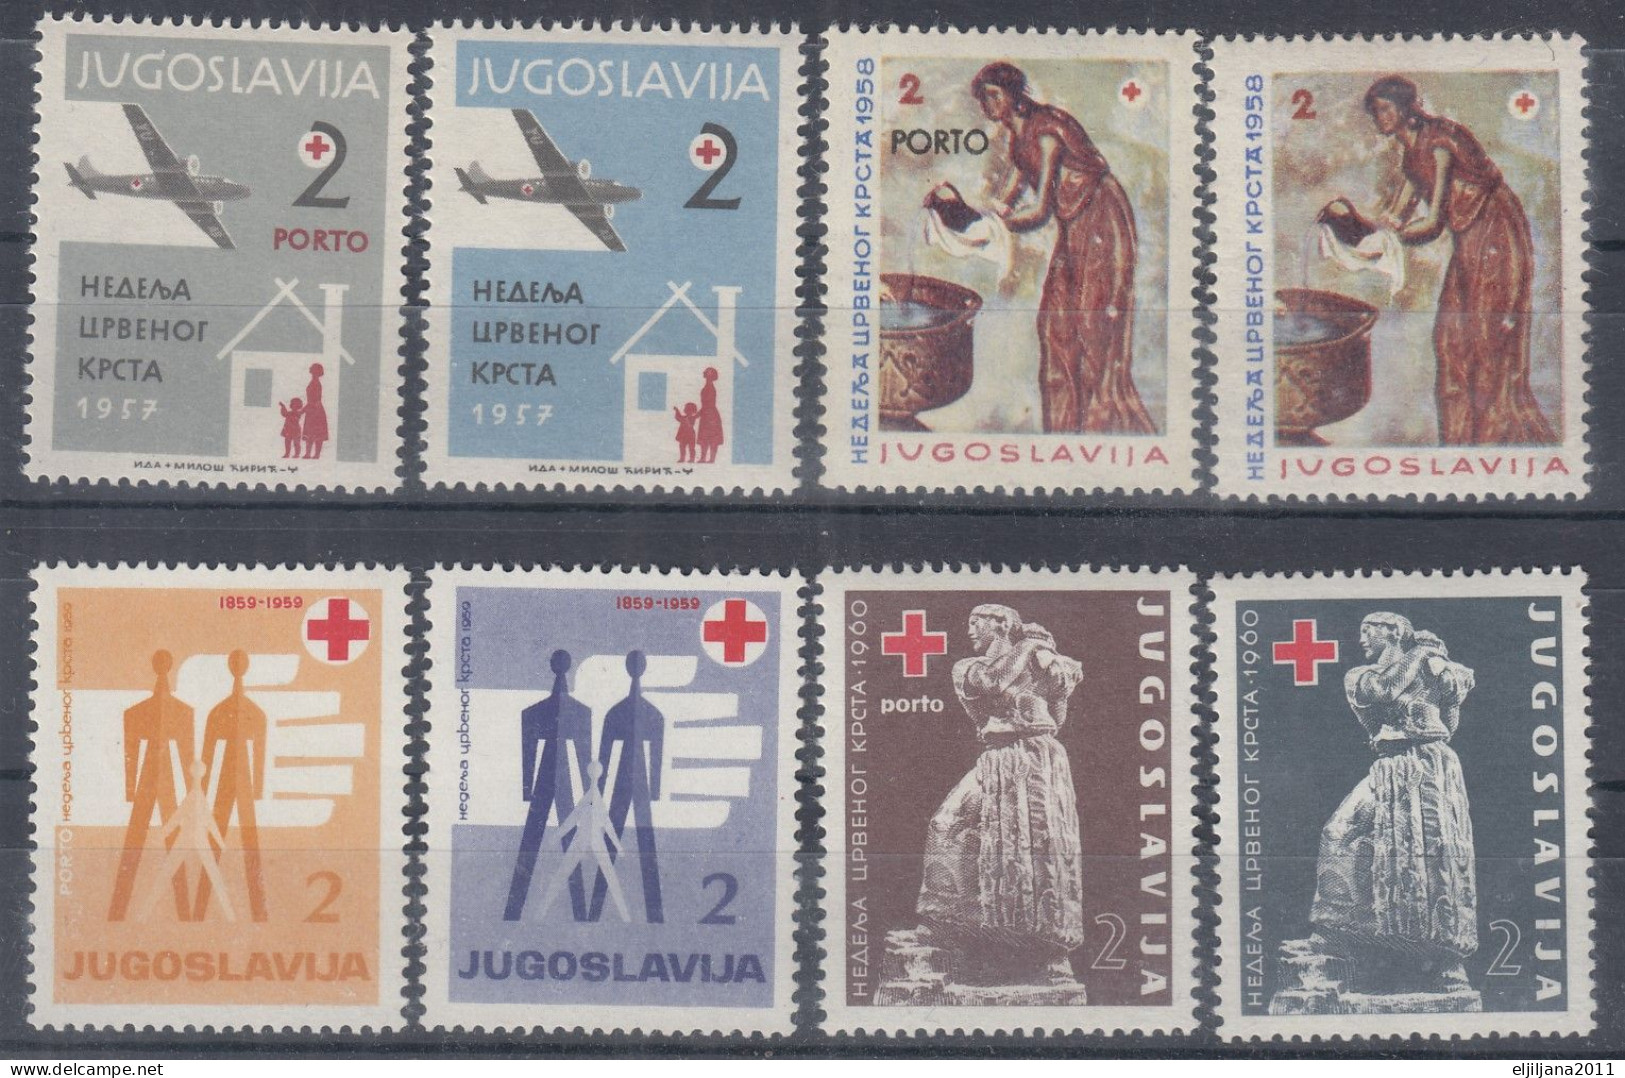 Action !! SALE !! 50 % OFF !! ⁕ Yugoslavia 1957 - 1960 ⁕ Postage Due & Red Cross ⁕ 8v MNH - Beneficenza